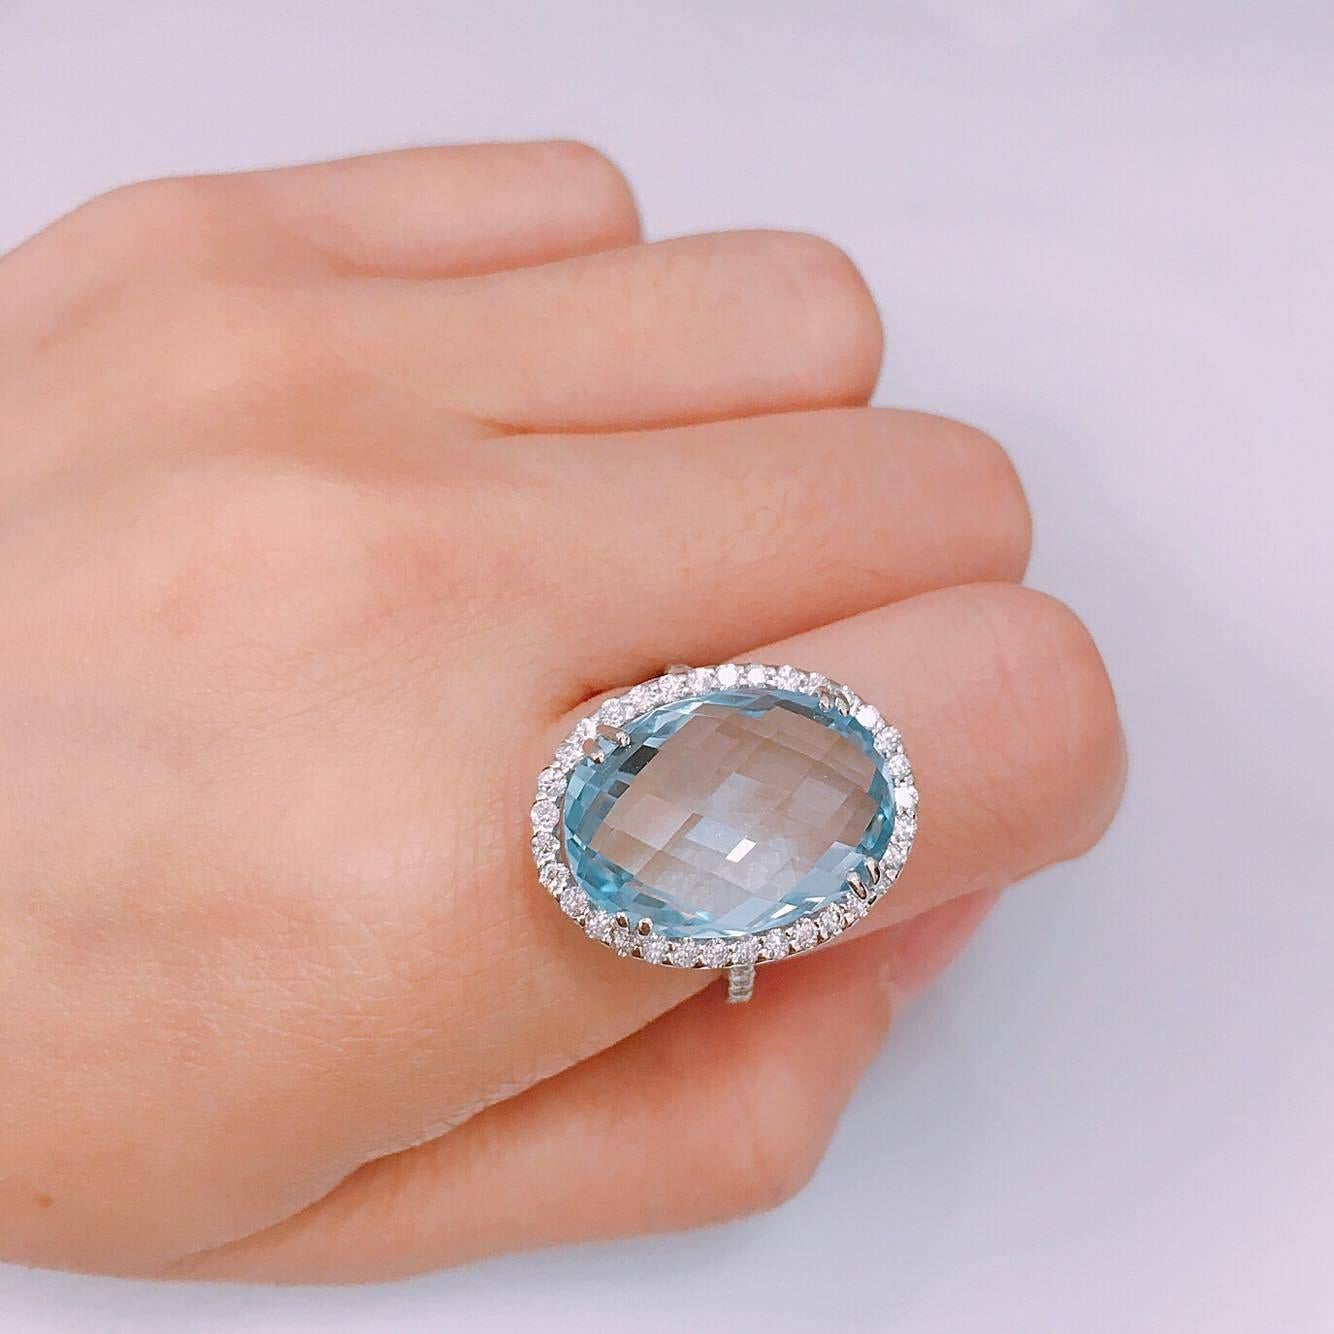 An astonishing double sided checkerboard cut Blue Topaz sits in the center of this gorgeous hand made ring. Please include your ring size in the order. 
Approx total weight: 8.10 cts
Diamond Color: E-F
Diamond Clarity: Si 
Cut: Excellent 
As noted